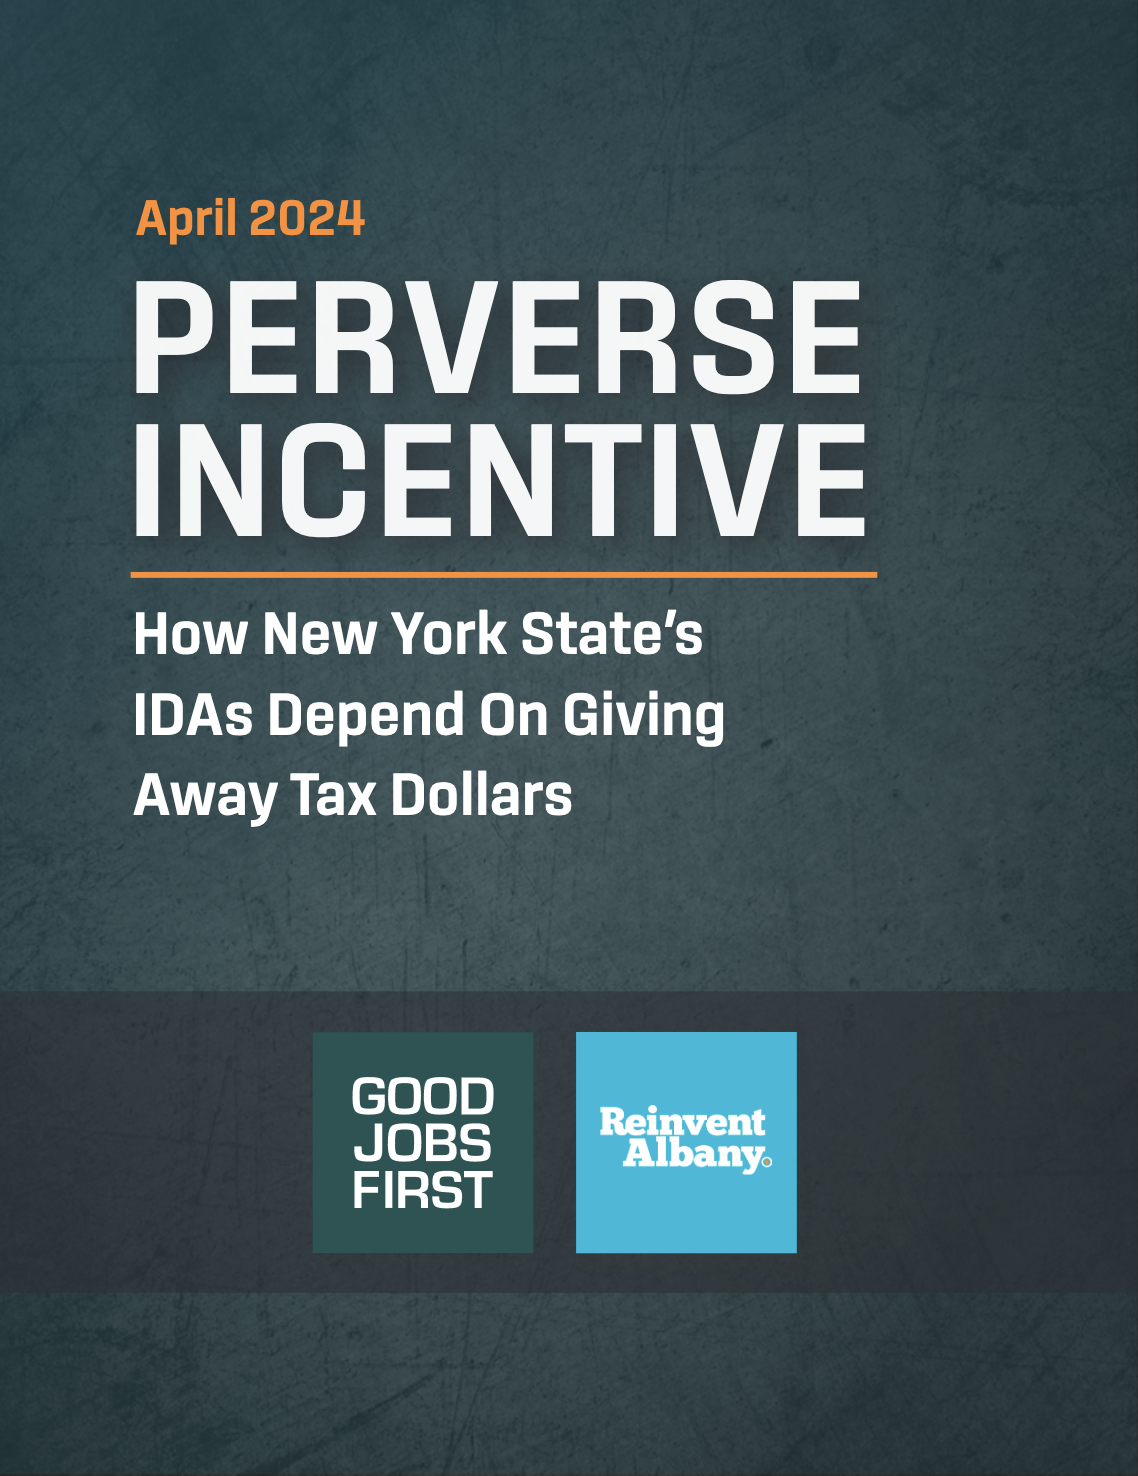 Perverse Incentive: How New York State’s IDAs Depend on Giving Away Tax Dollars